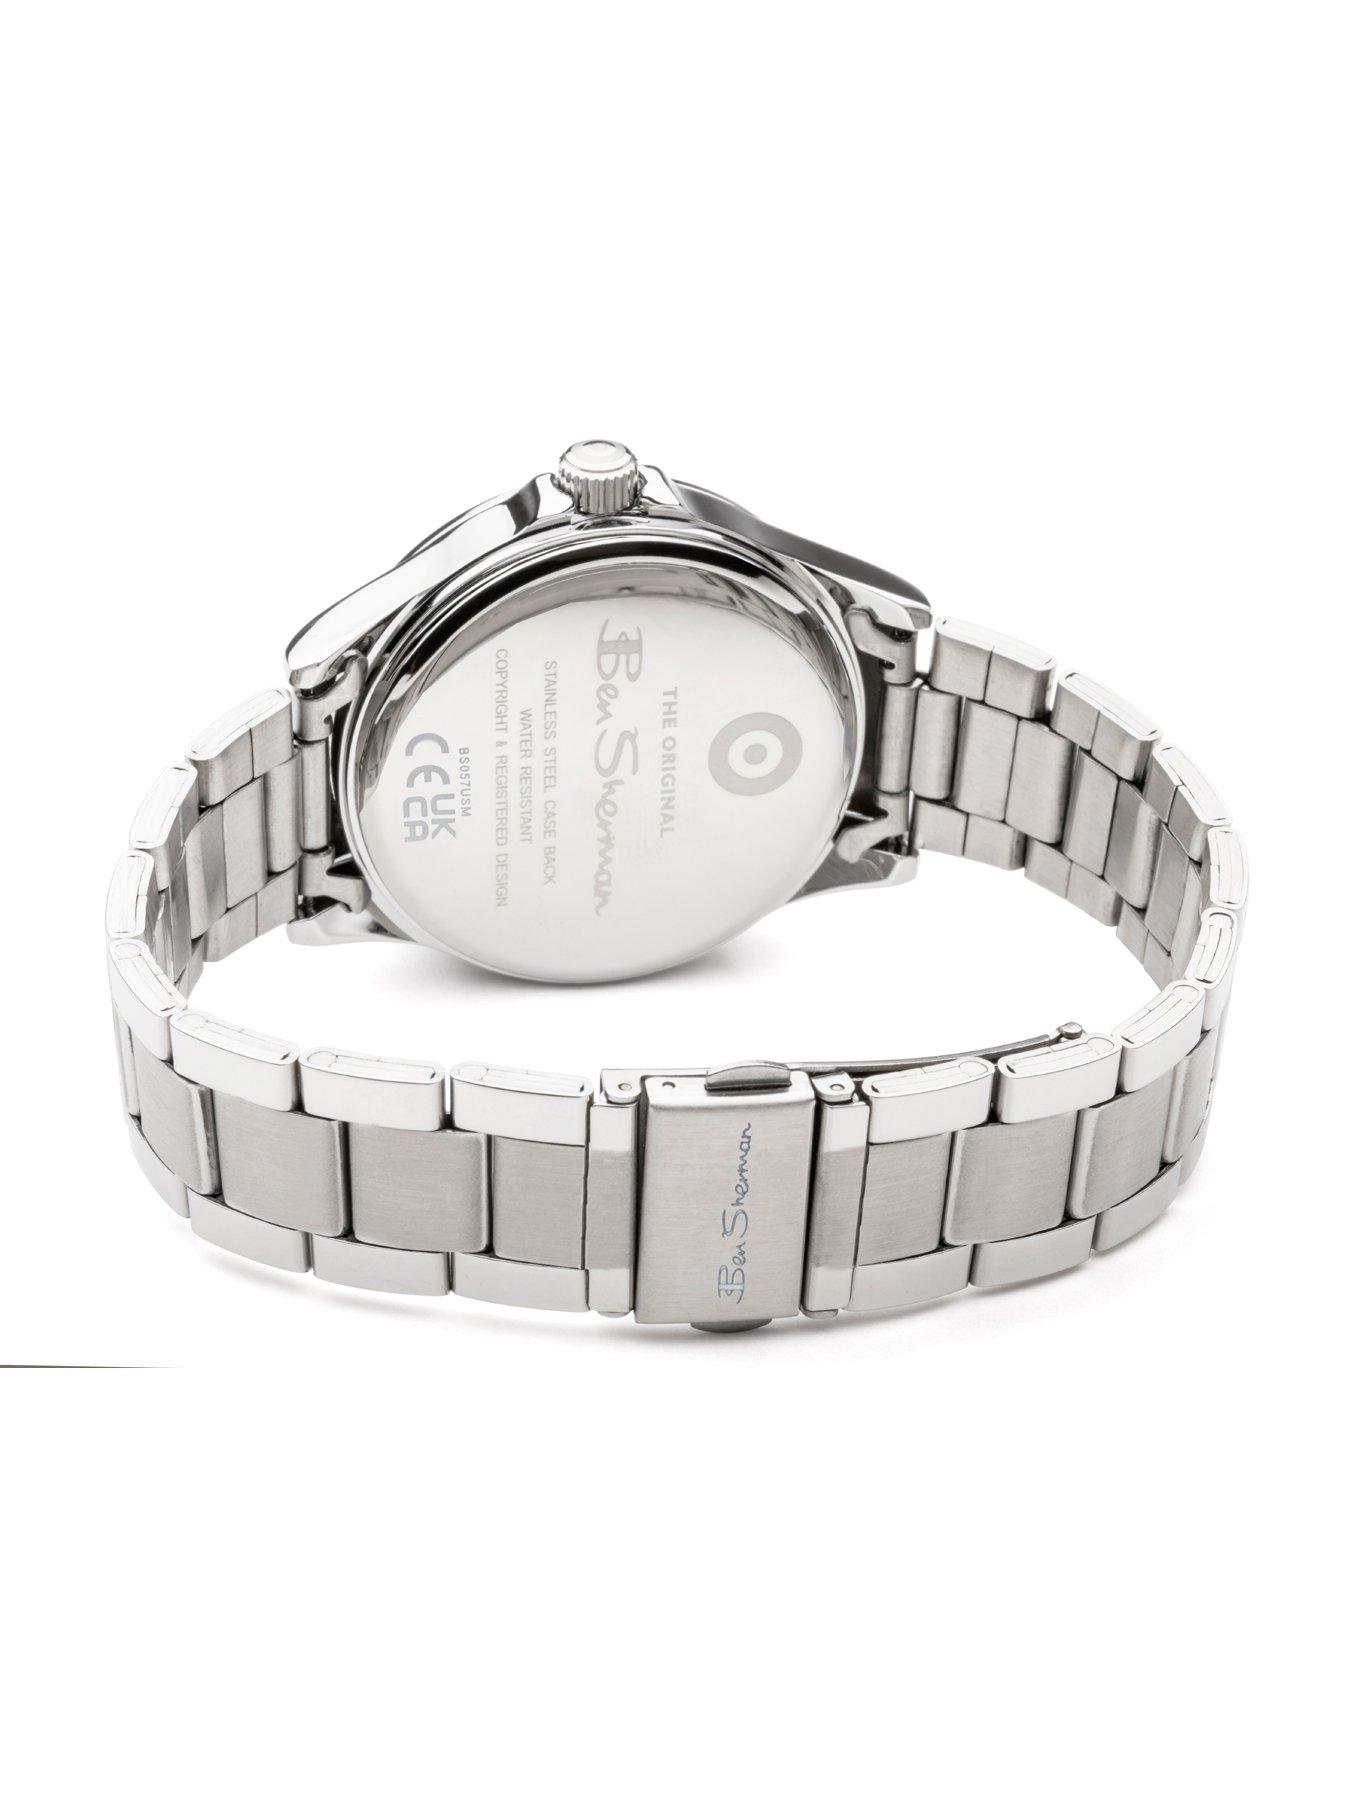  Silver Mens Stainless Steel Bracelet Watch with Navy Dial